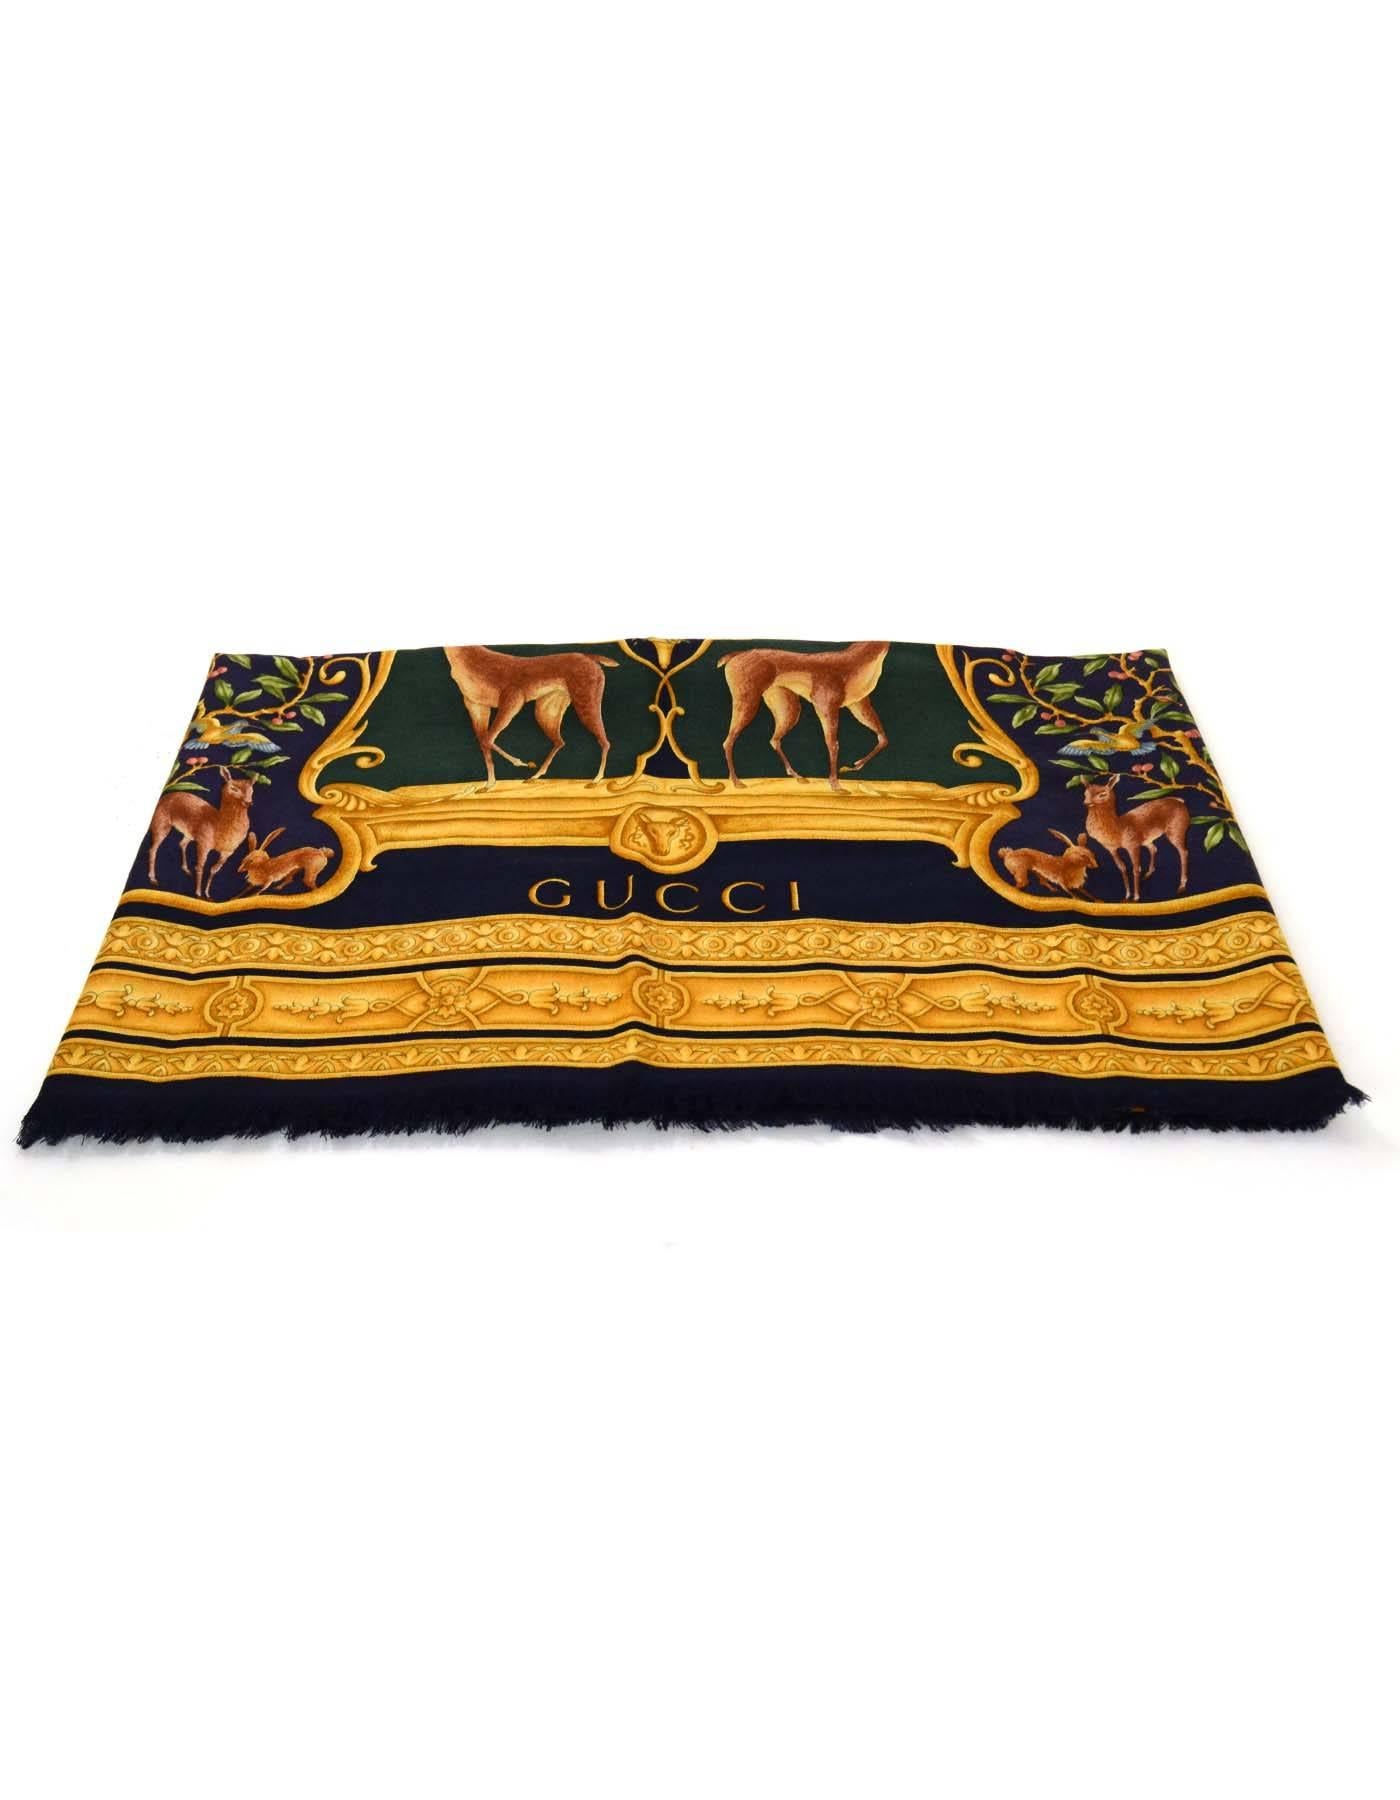 100% Authentic Gucci Divine Diana Wool and Silk Shawl features female goddess surrounded by animals and nature. This beautiful vintage piece can be worn as a shawl, scarf, or even as a wrap. Fringe trim adds an extra touch of intricacy.

       